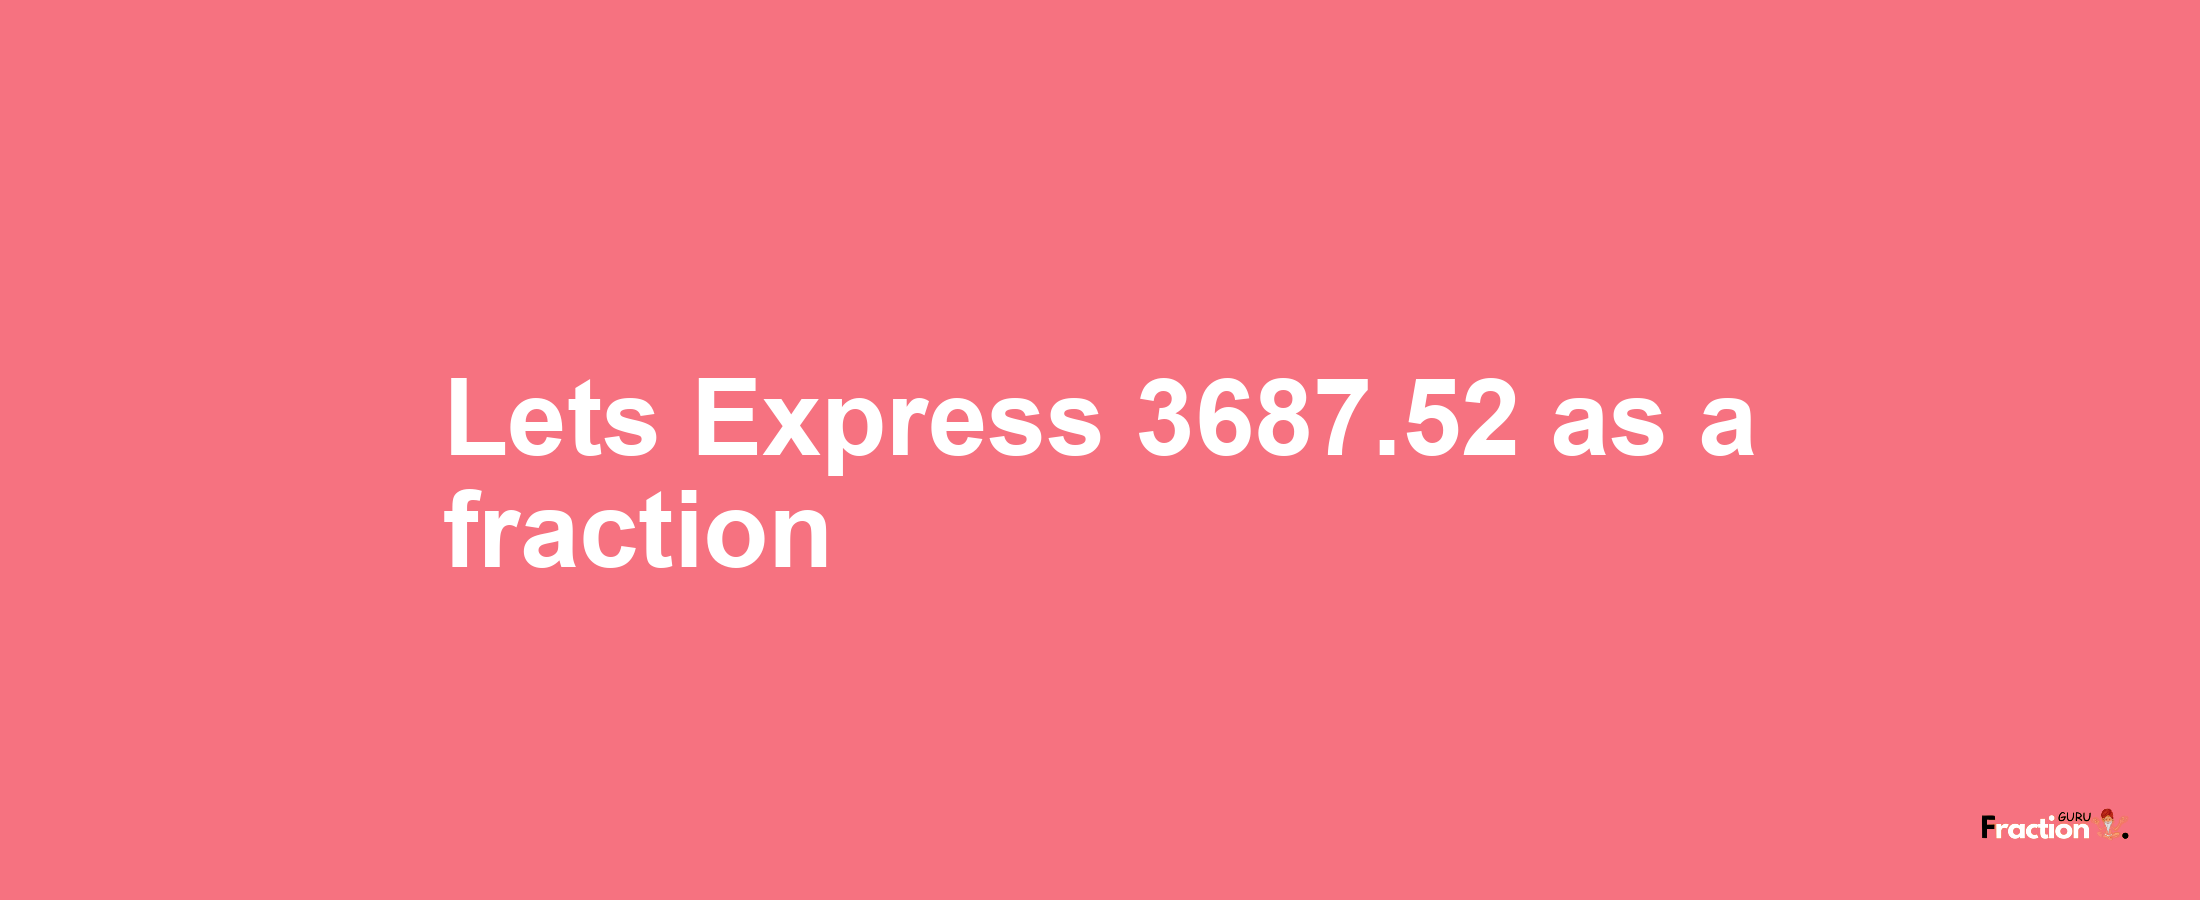 Lets Express 3687.52 as afraction